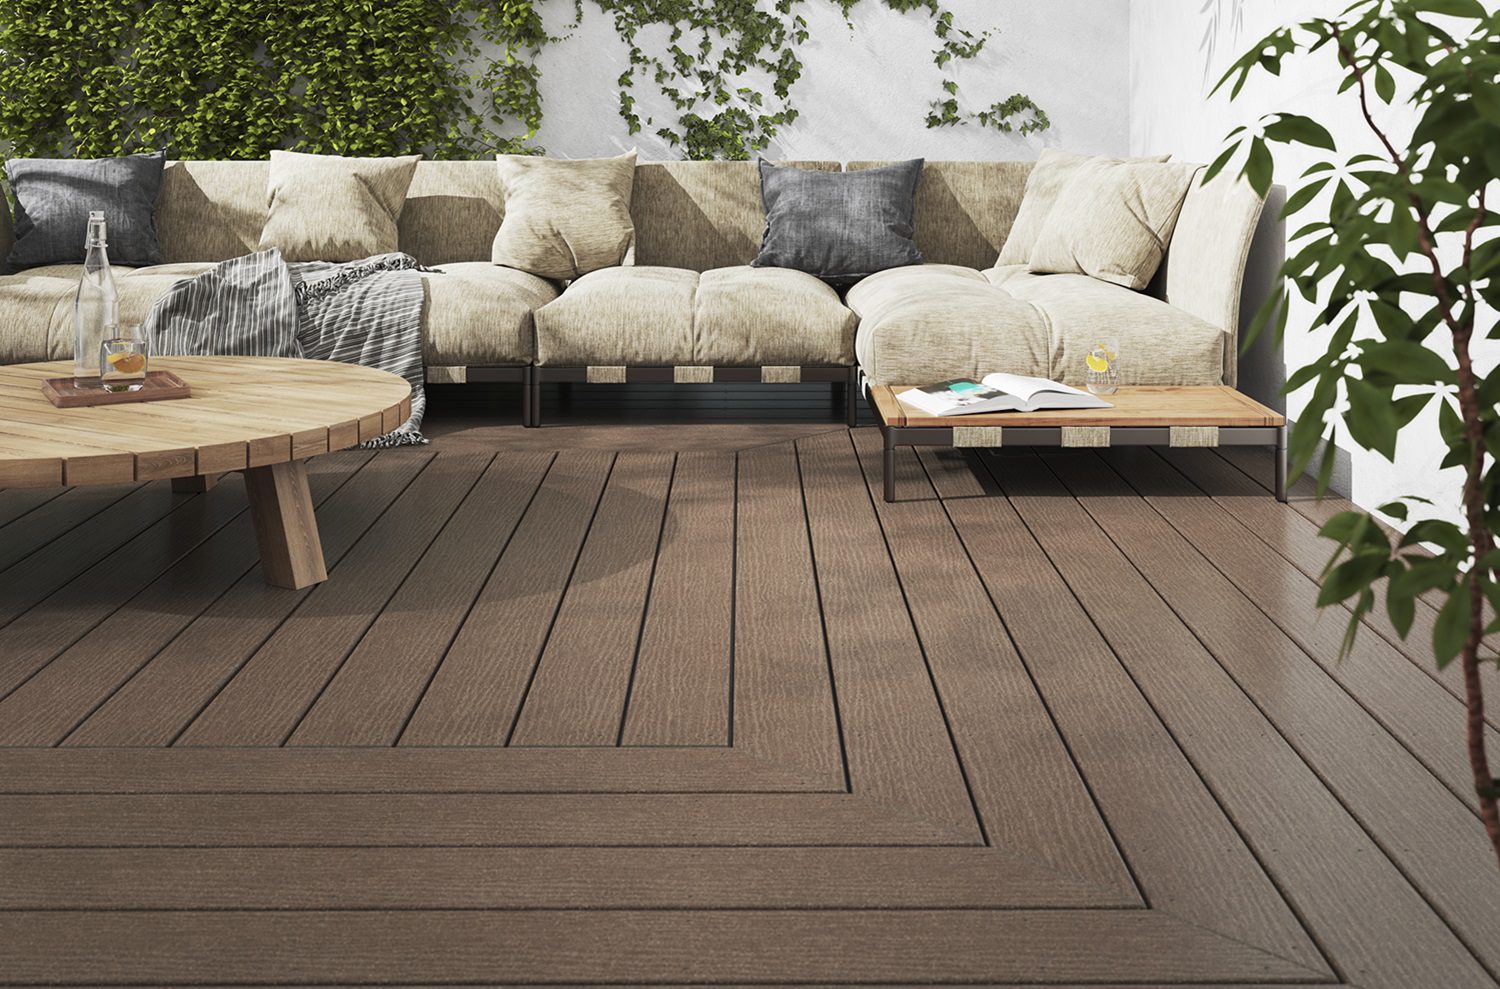 Heritage light brown wood effect composite decking with seating